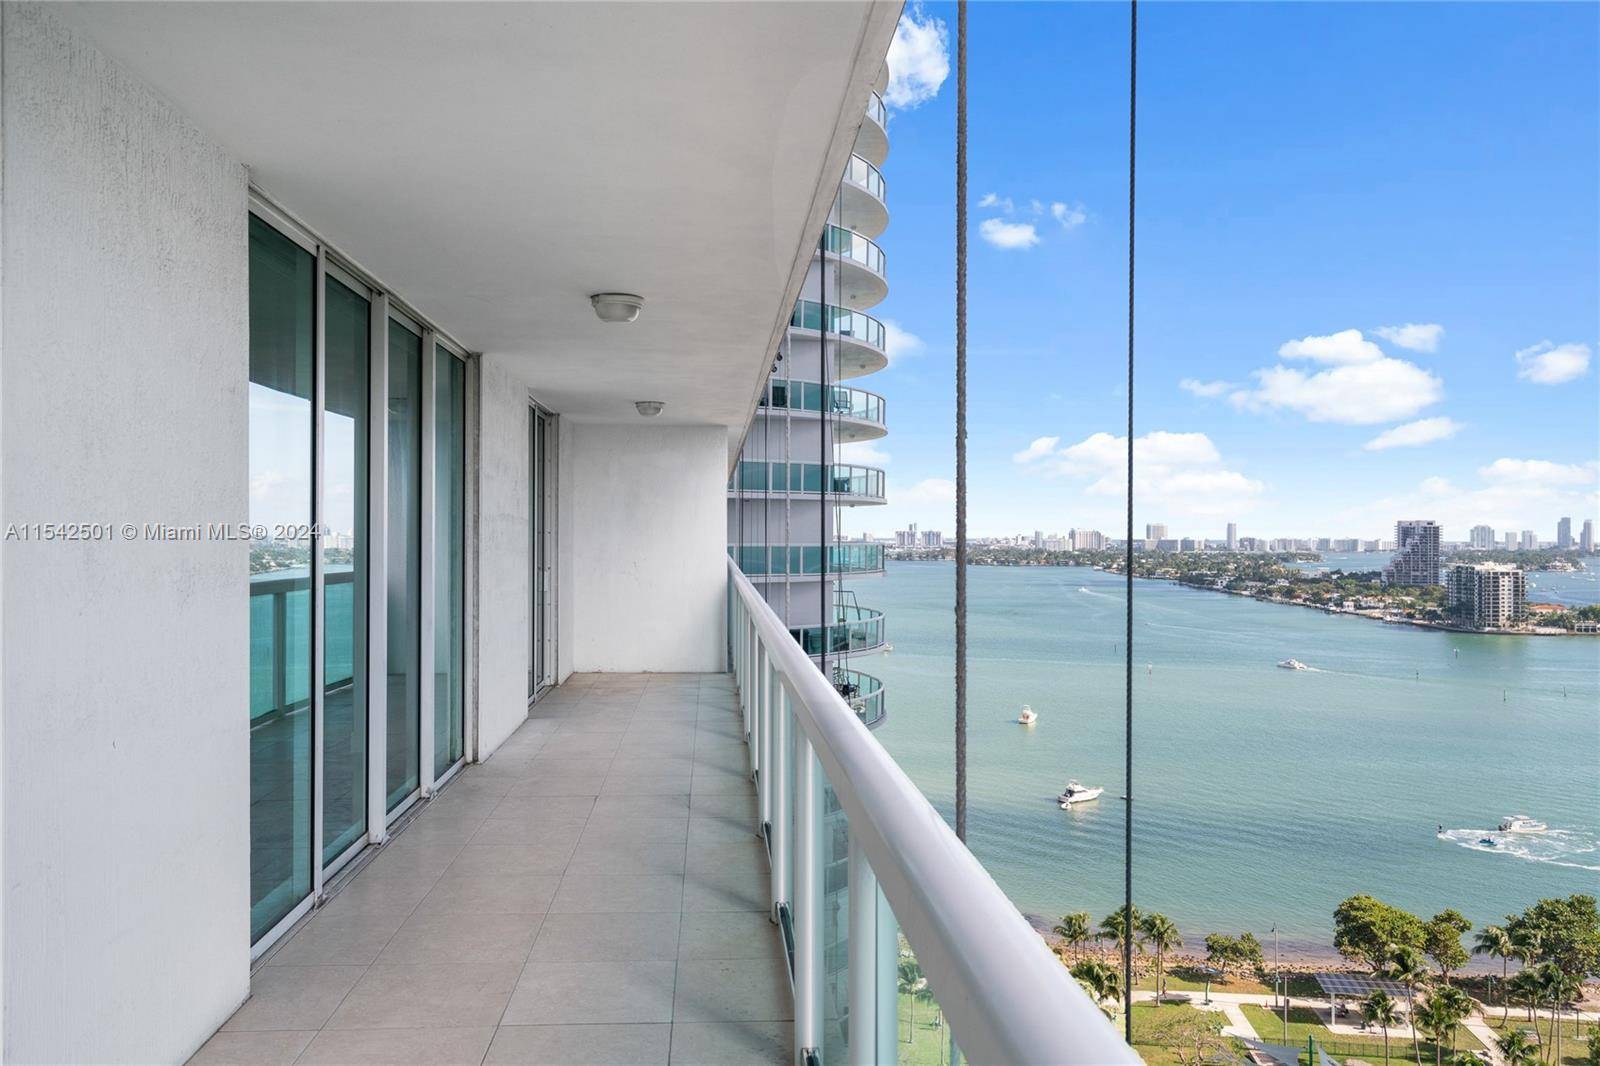 BEAUTIFUL BAY VIEW APARTMENT FOR RENT IN DESIRABLE EDGEWATER AREA OF MIAMI !